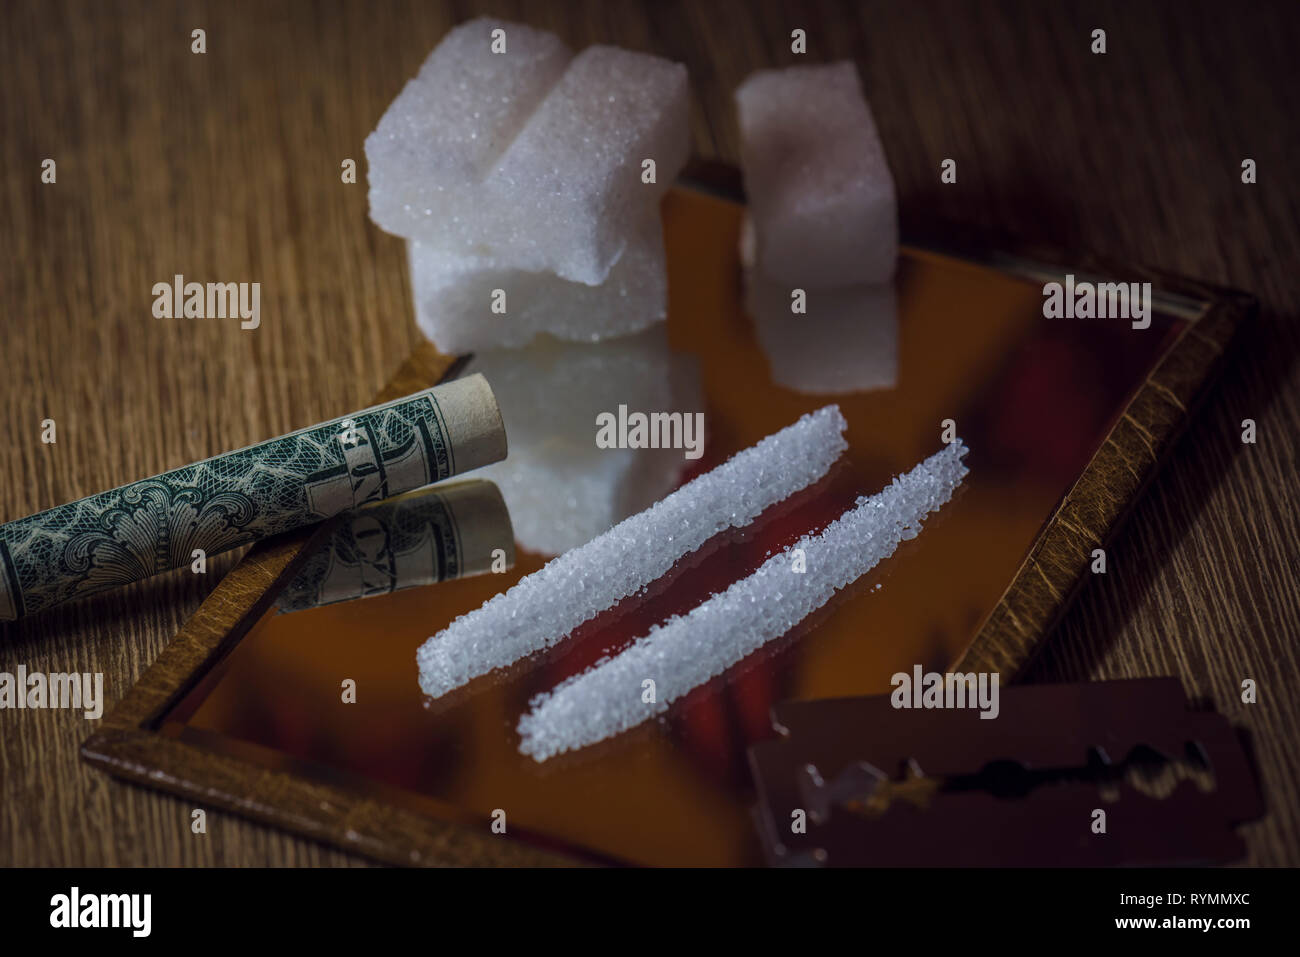 conceptual scene of sugar addiction causing health problems like real drugs. Stock Photo